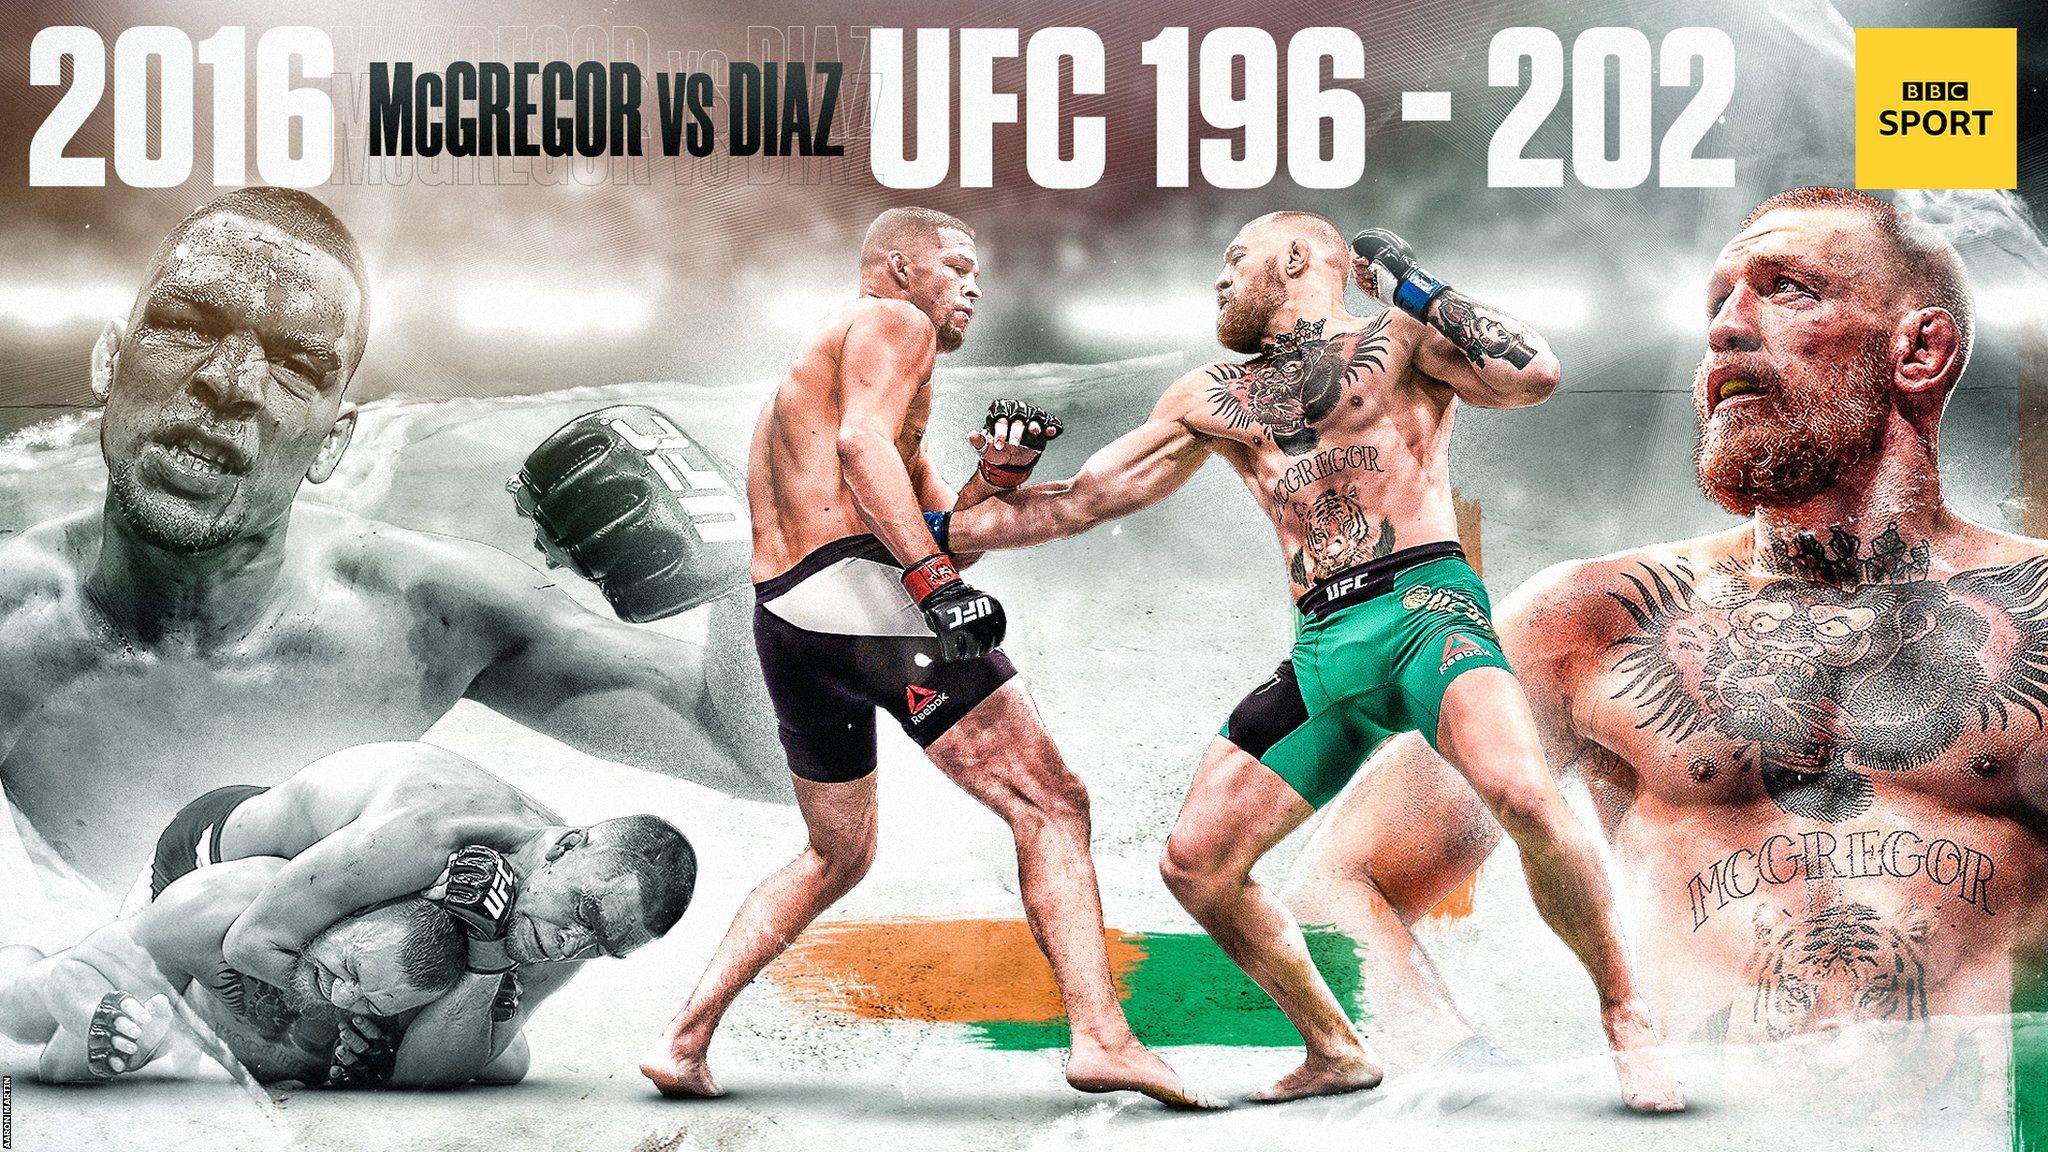 Graphic showing the best moments of Conor McGregor's rivalry with Nate Diaz